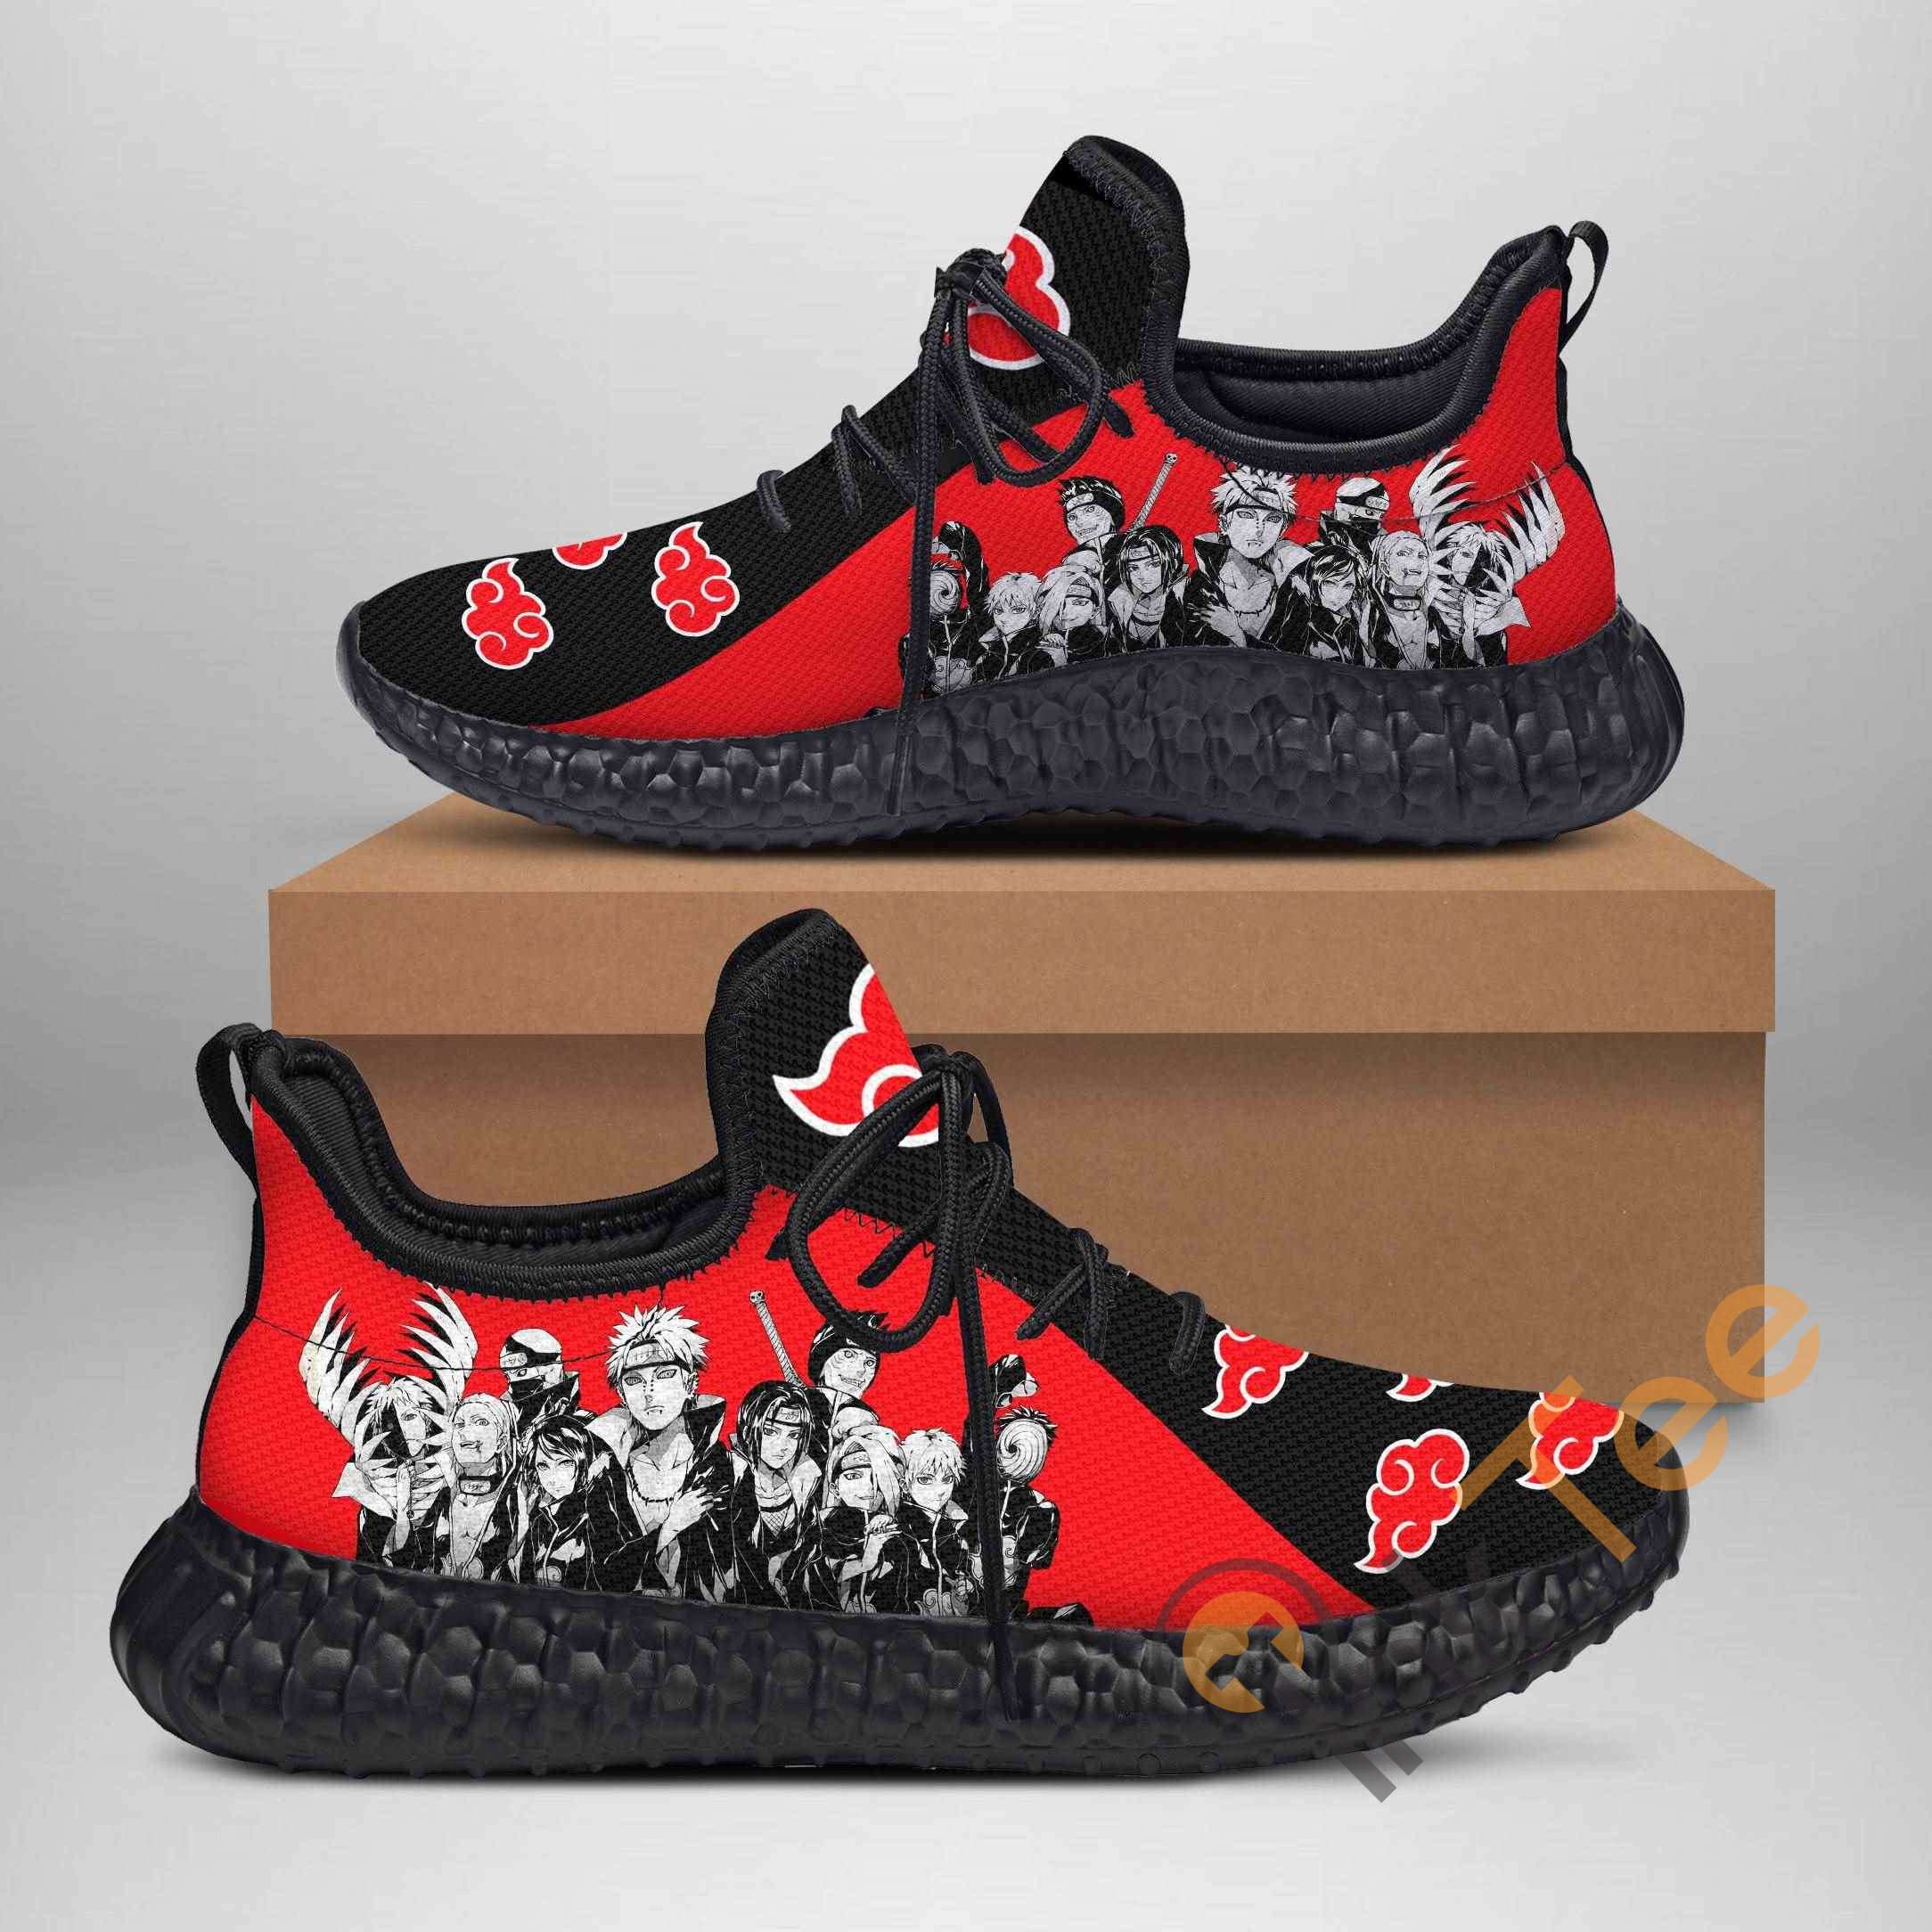 red sox yeezys